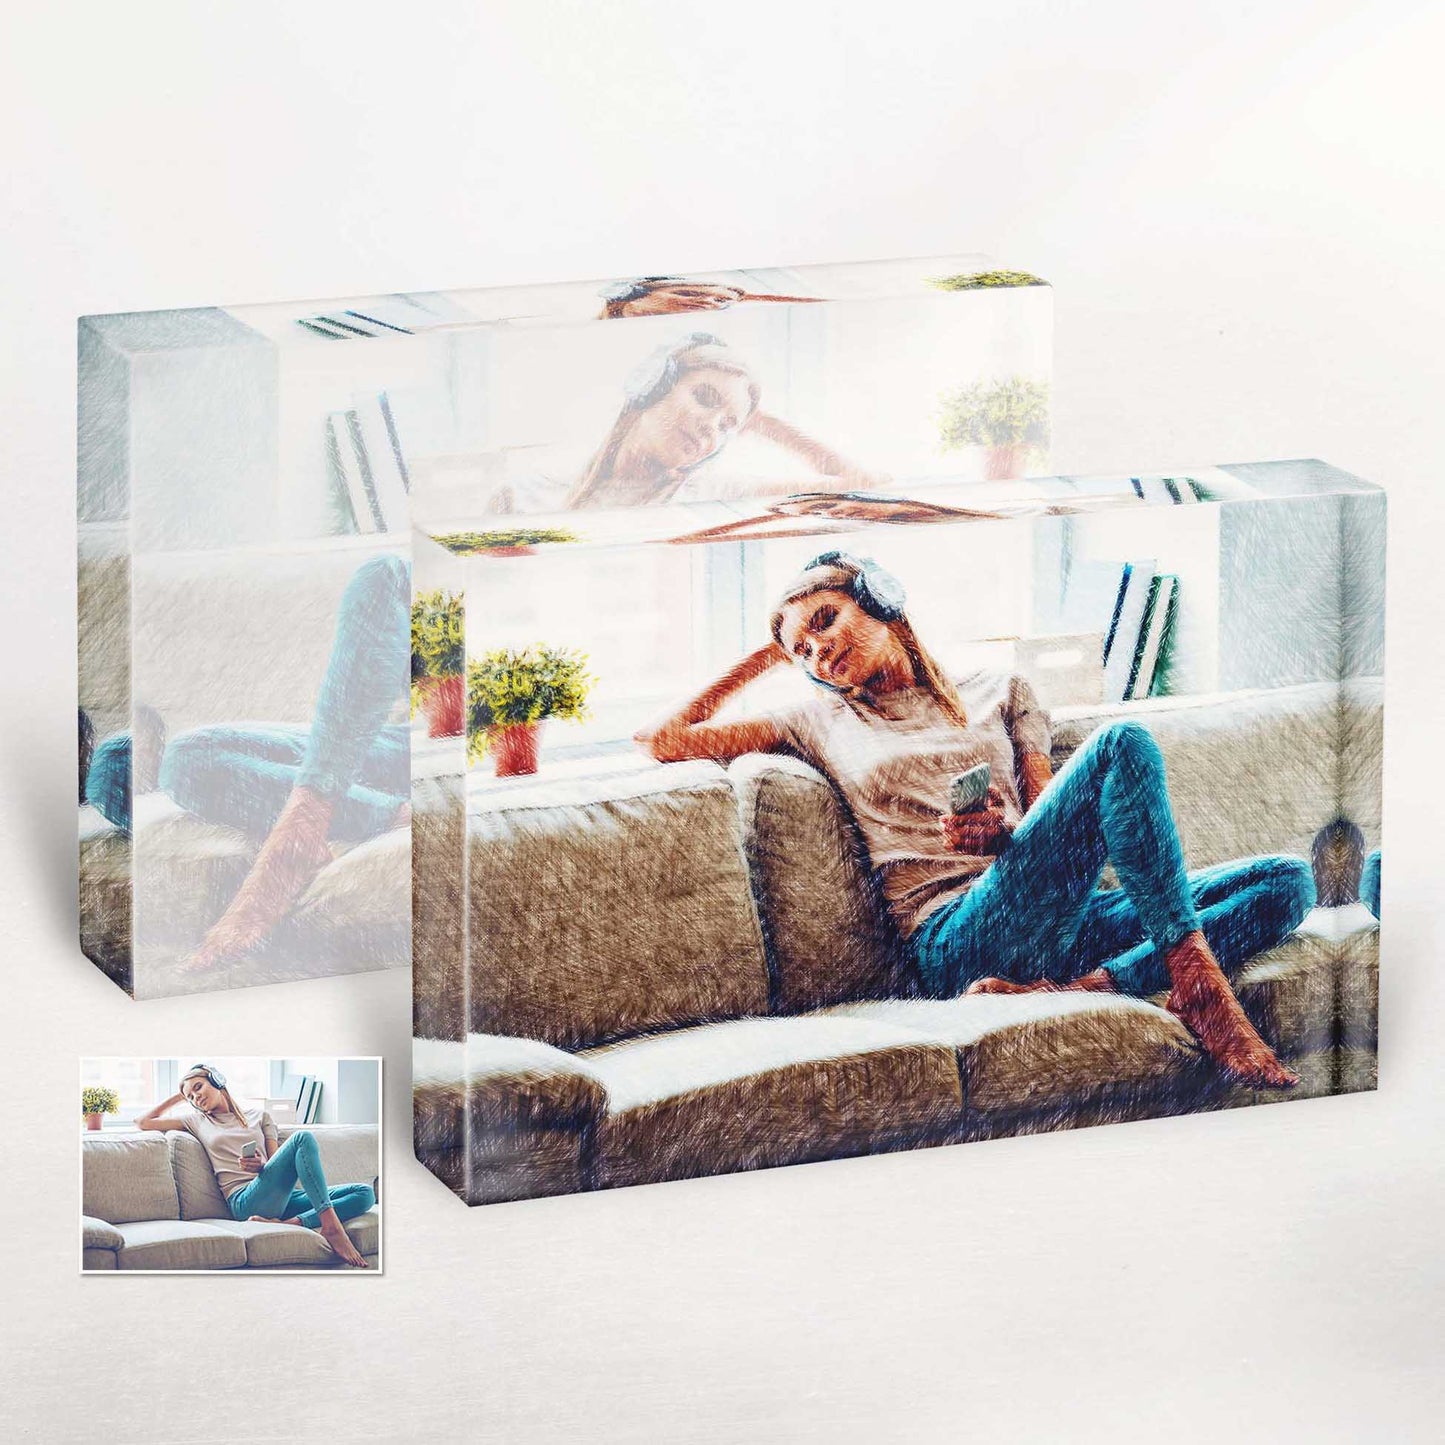 Celebrate the beauty of your relationships with our Personalised Colourful Drawing Acrylic Block Photo. Its chic and vibrant artwork brings your family and friends to life, creating a one-of-a-kind original piece that is creatively made to order.